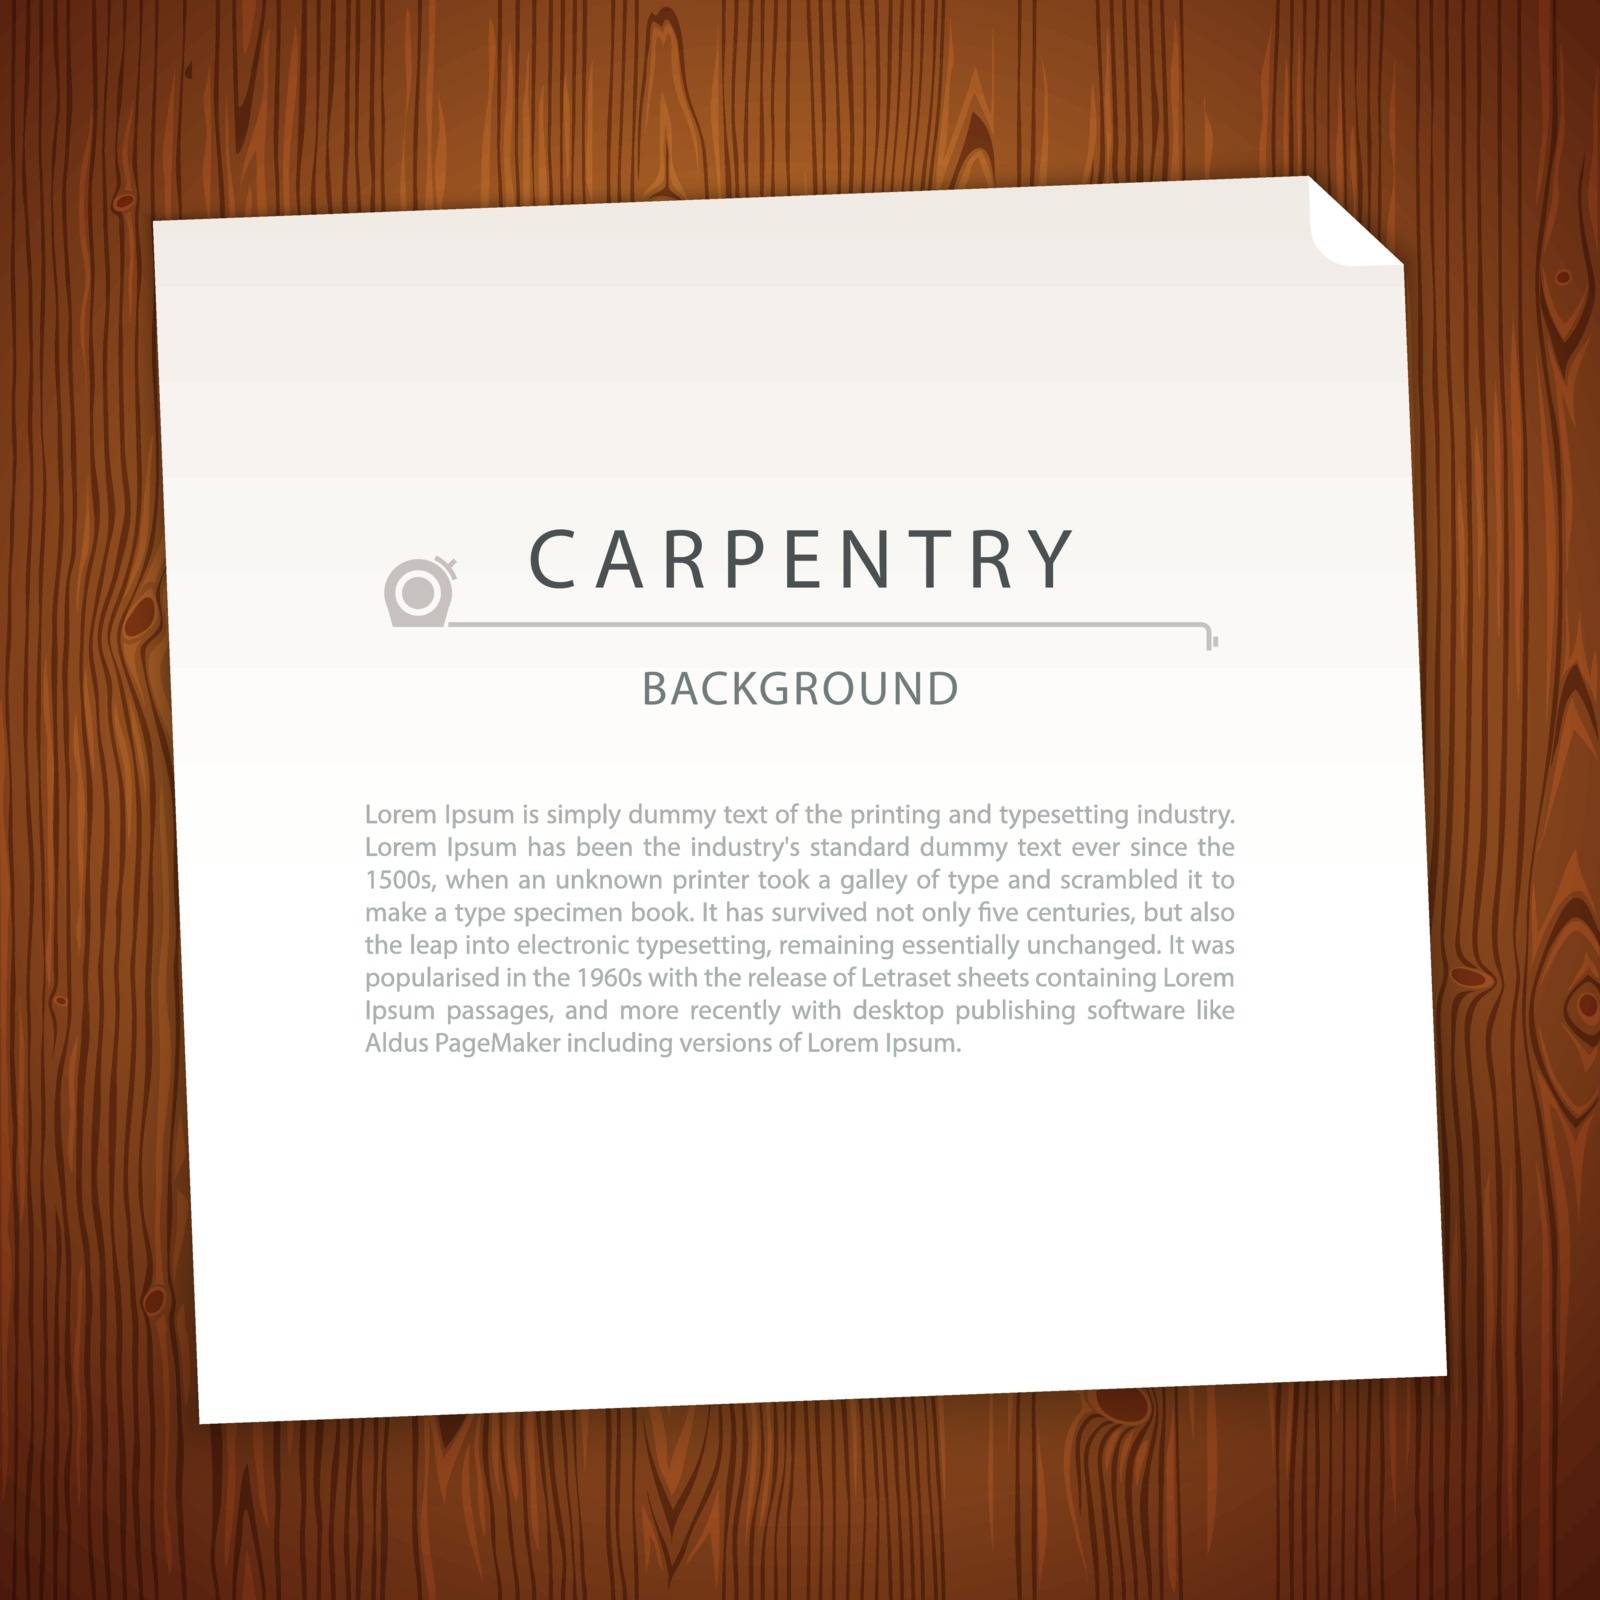 Carpentry Background on Wooden Texture. In the EPS file, each element is grouped separately. Clipping paths included in additional jpg format.